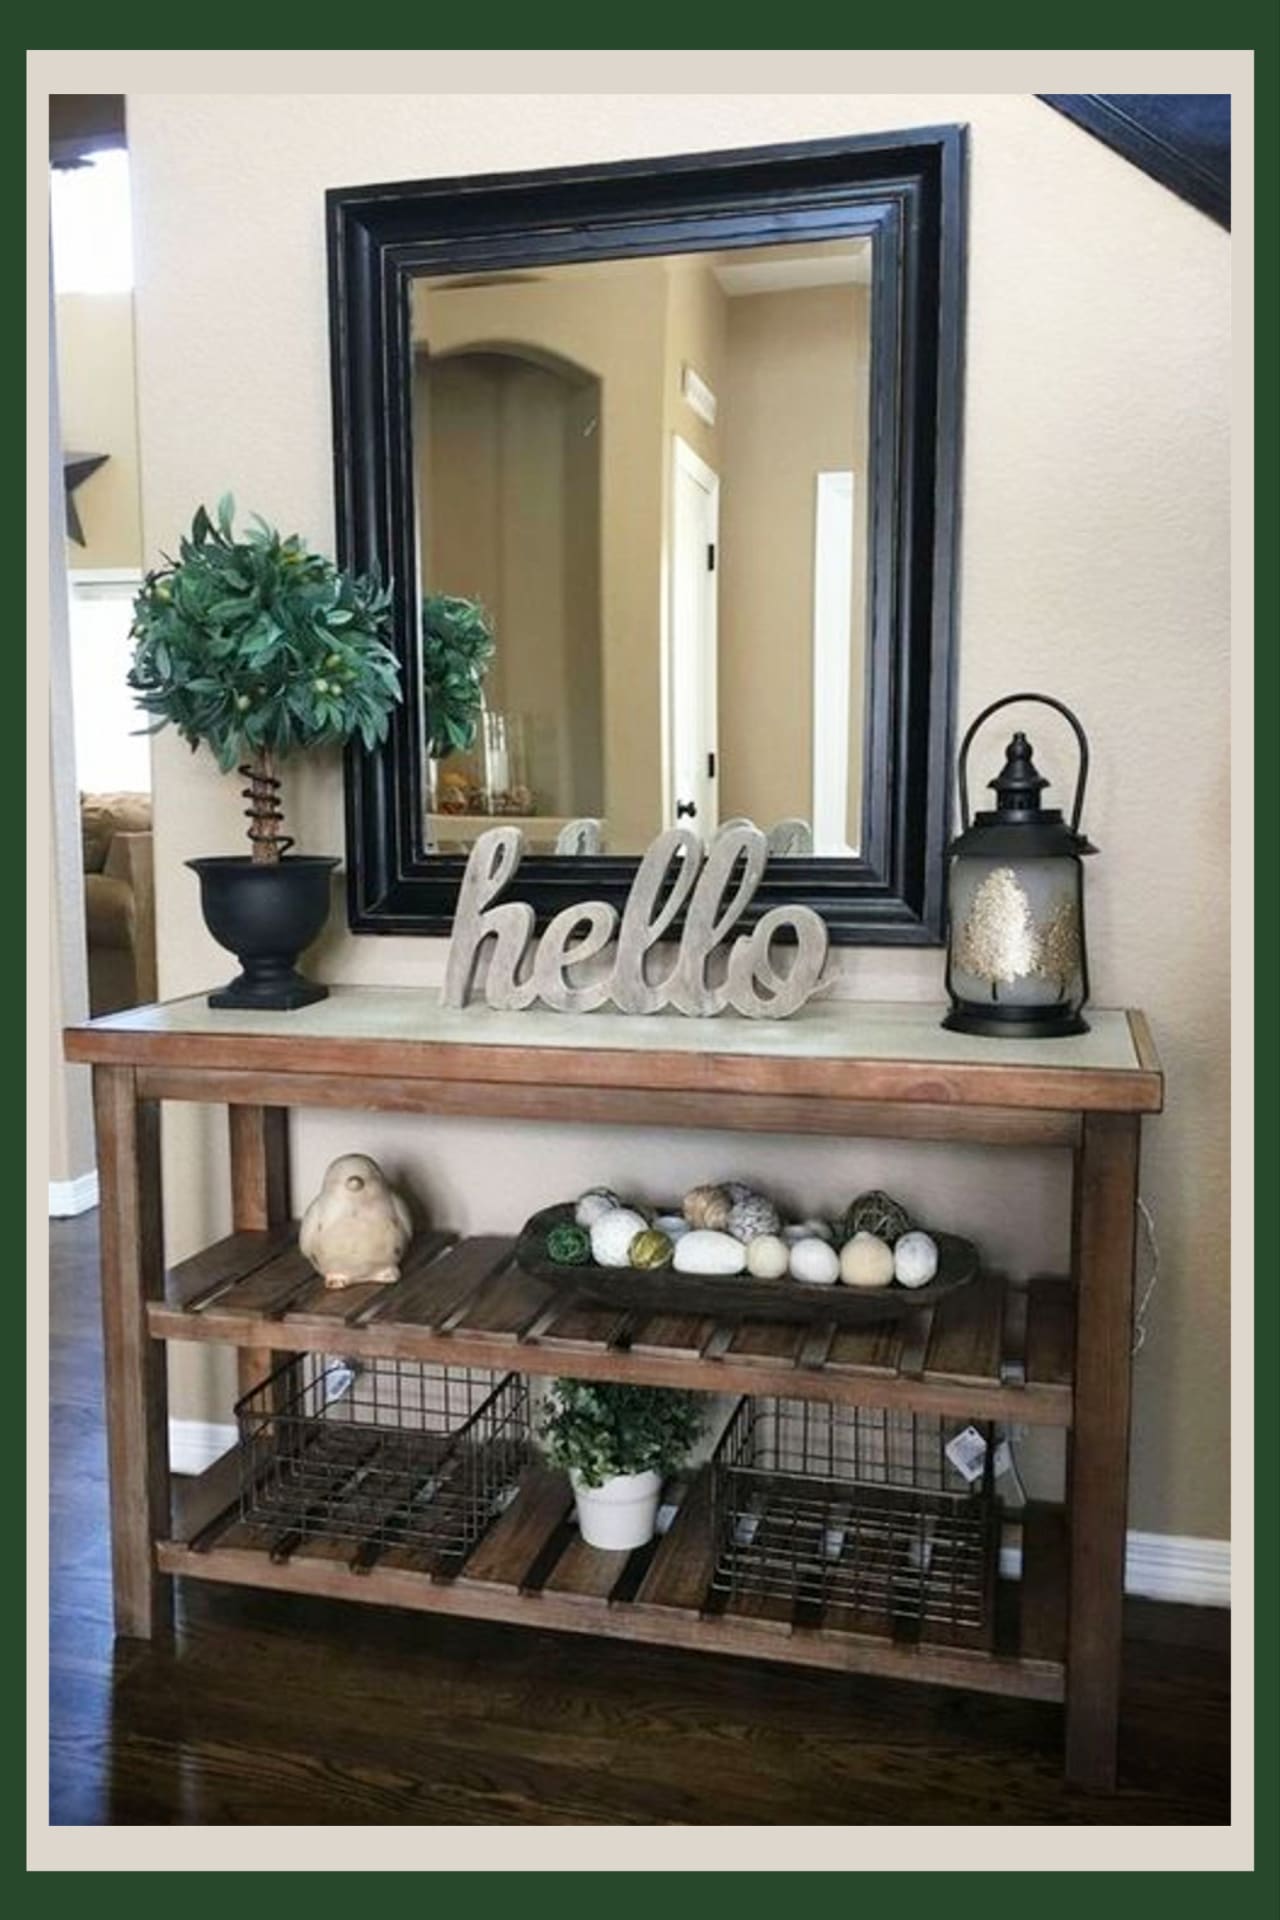 Foyer Decorating ideas - Small Farmhouse foyer entryway hall with rustic farmhouse table - - Small Foyer Wall Ideas - small foyer wall decorating ideas for very small entryways (like small apartment foyers) - see lots more small foyer ideas on a budget